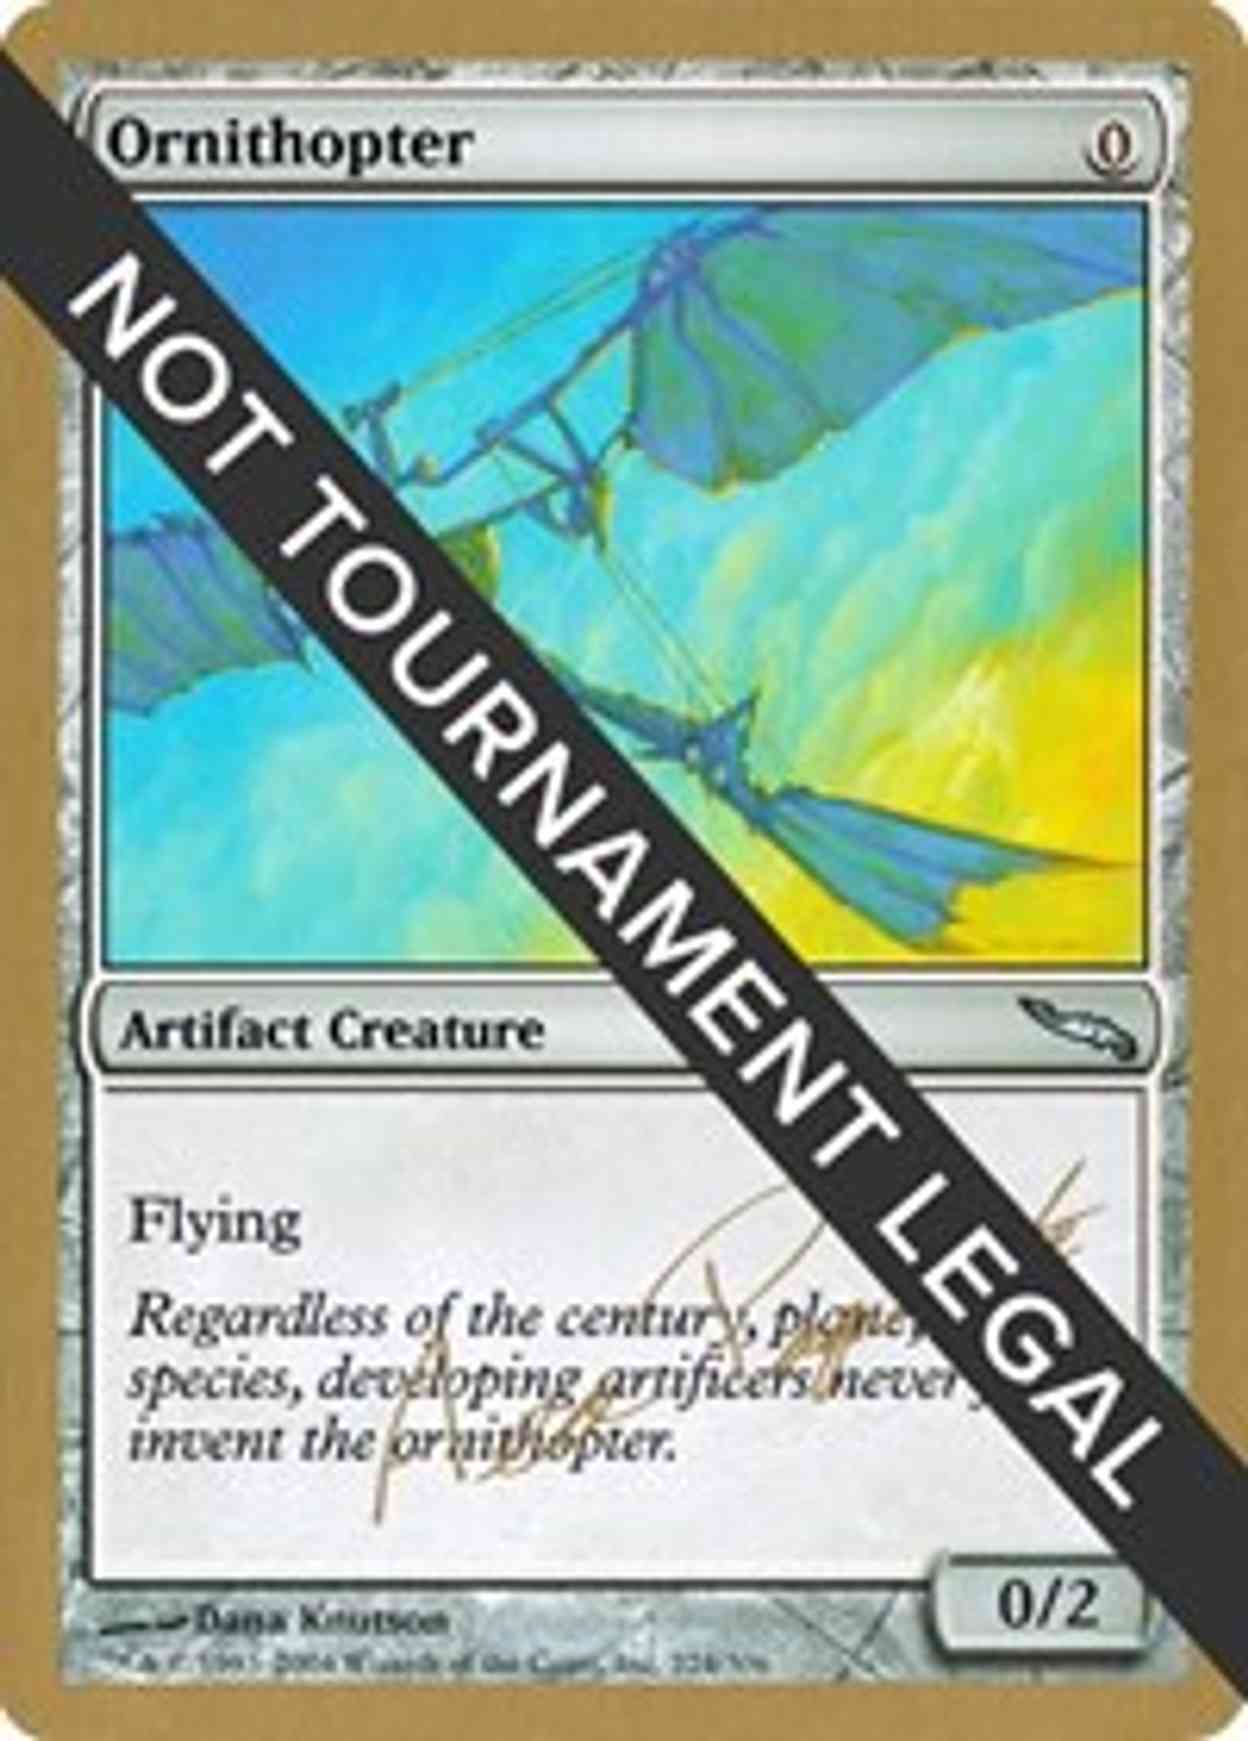 Ornithopter - 2004 Aeo Paquette (MRD) magic card front